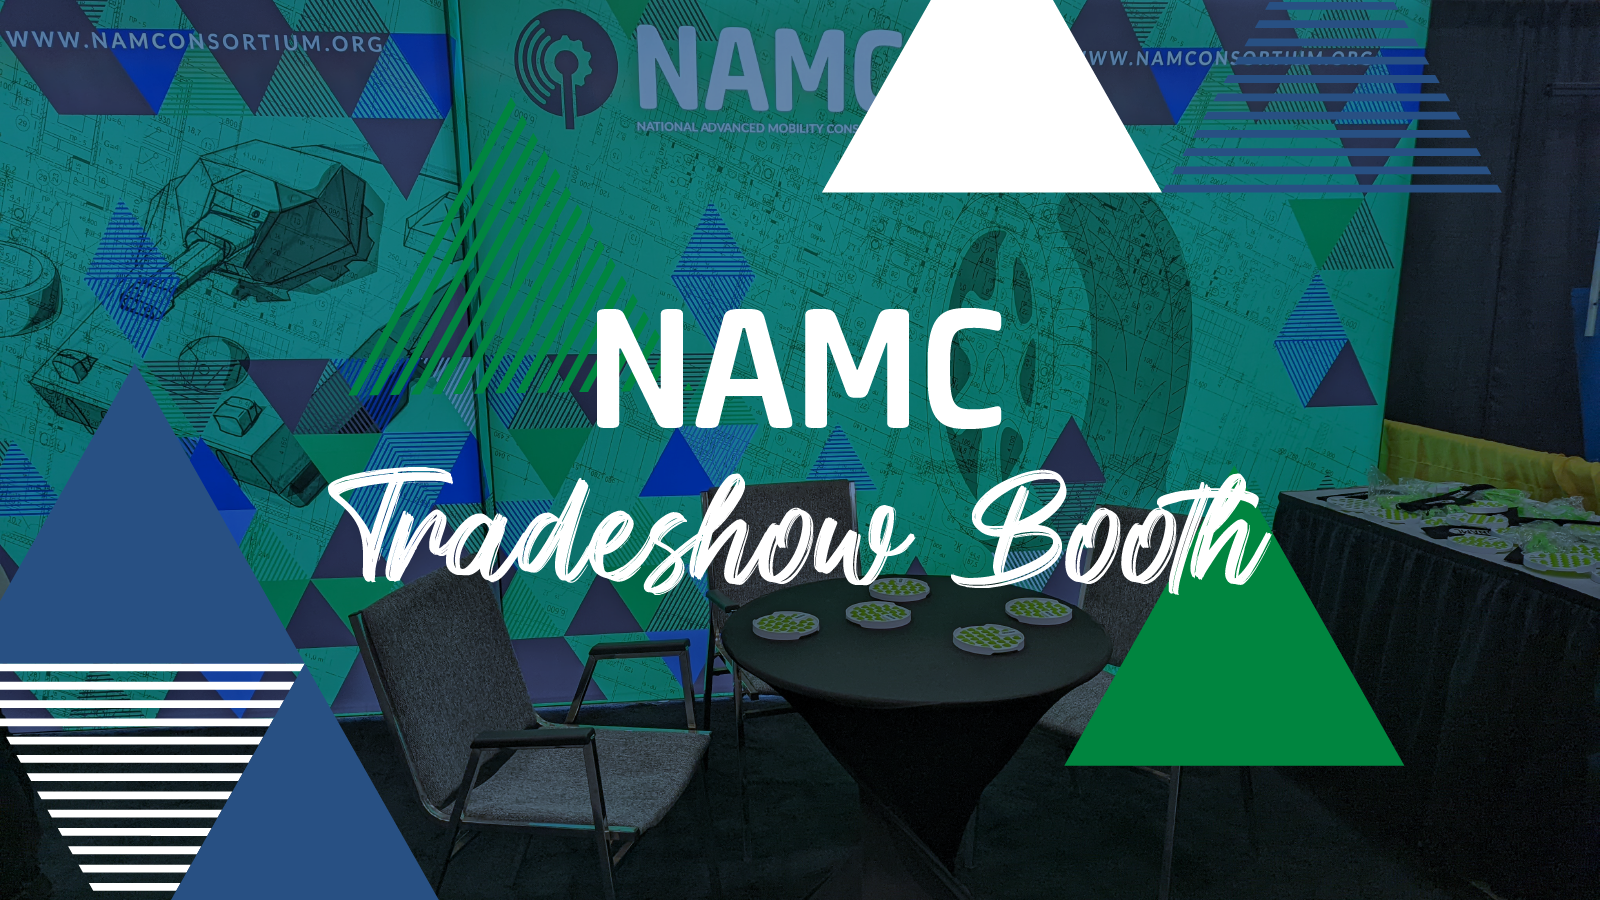 The NAMC trade show booth behind the words, "NAMC Trade Show Booth"